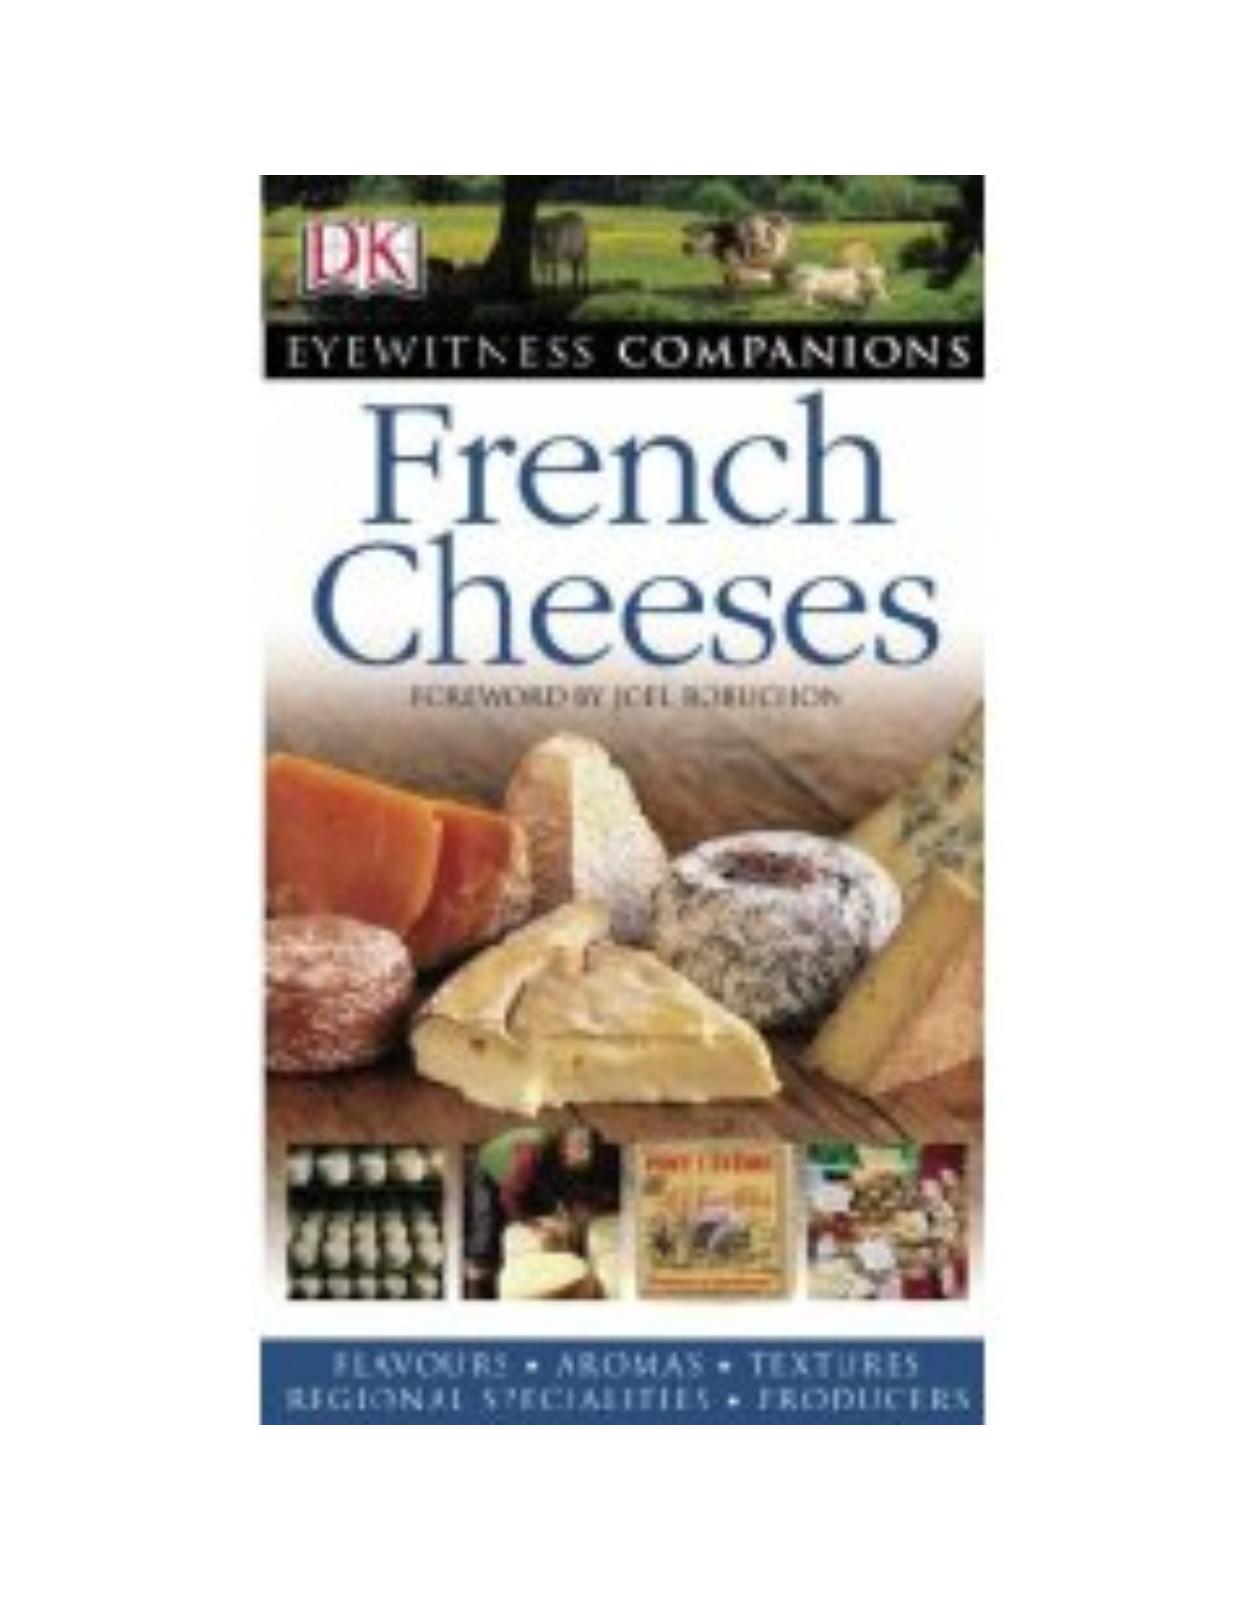 Eyewitness Companions: French Cheeses